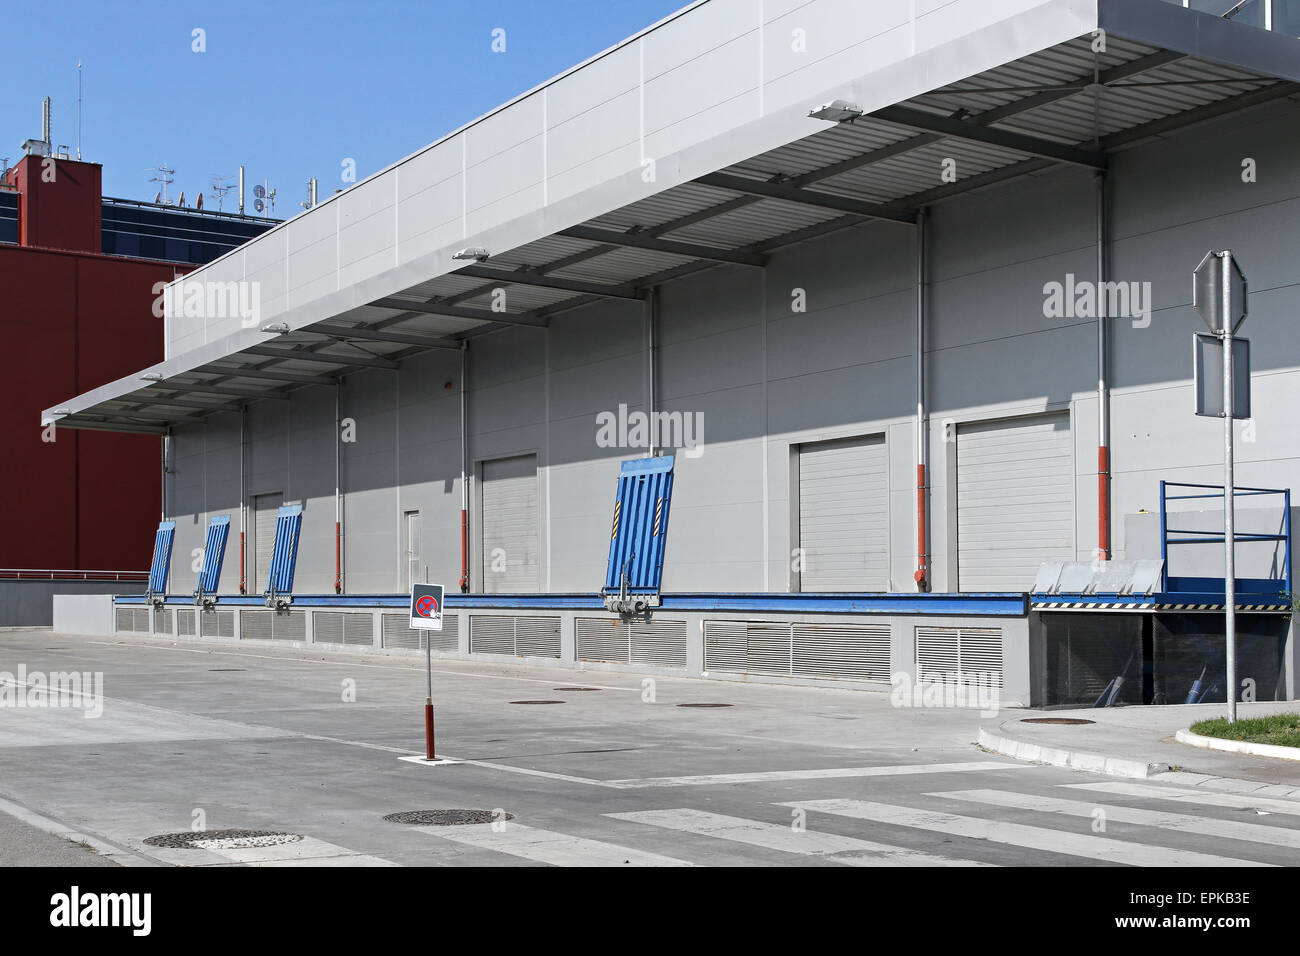 Industrial warehouse building with loading dock station Stock Photo